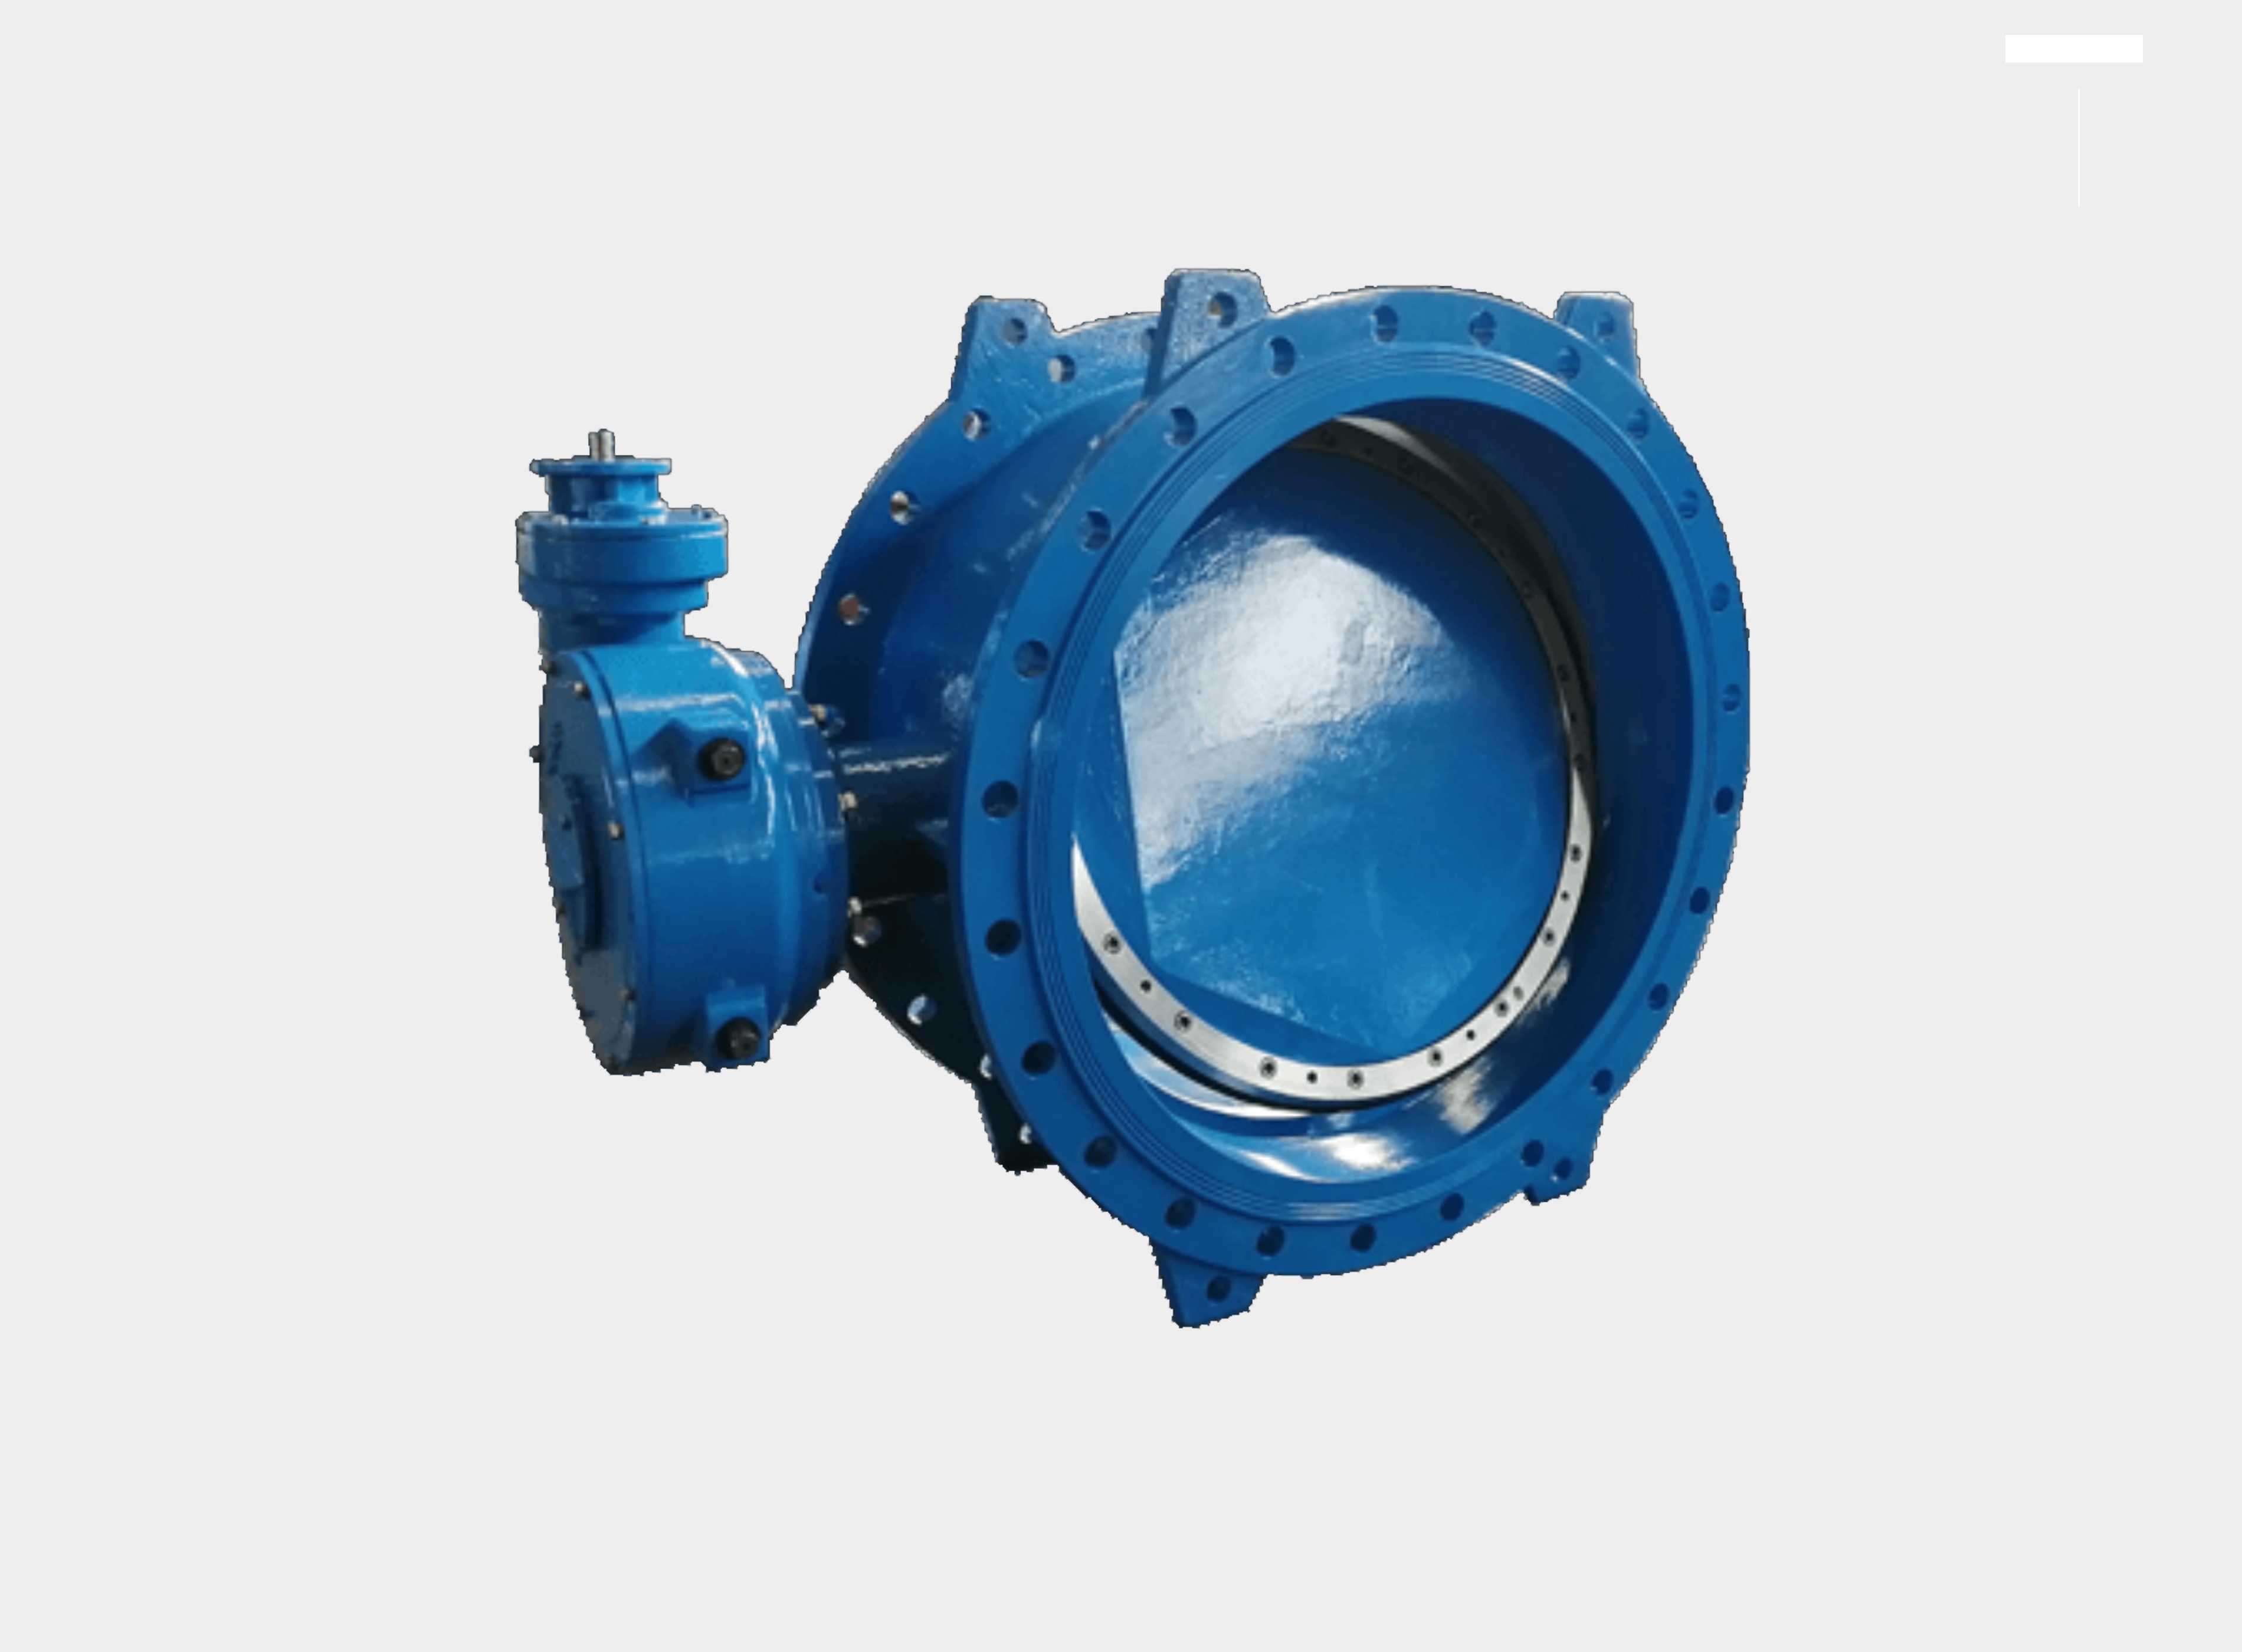 What is the function of butterfly valve?